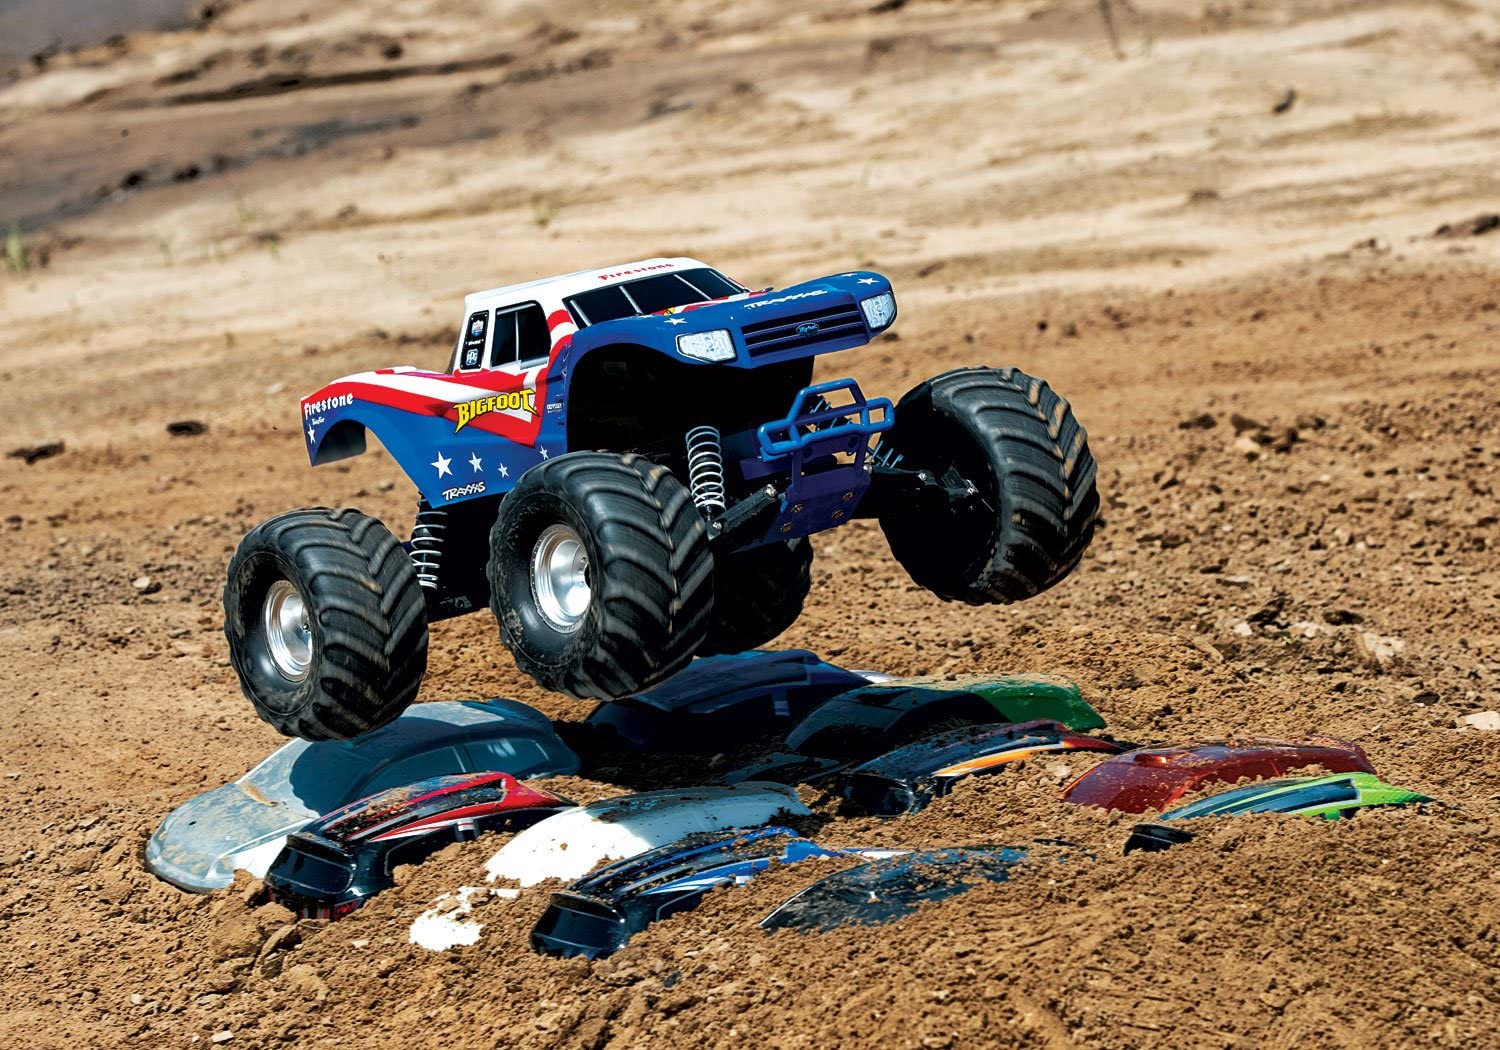 Traxxas 36084-1 Bigfoot 1/10 Scale Ready-to-Race Monster Truck, Red/White/Blue